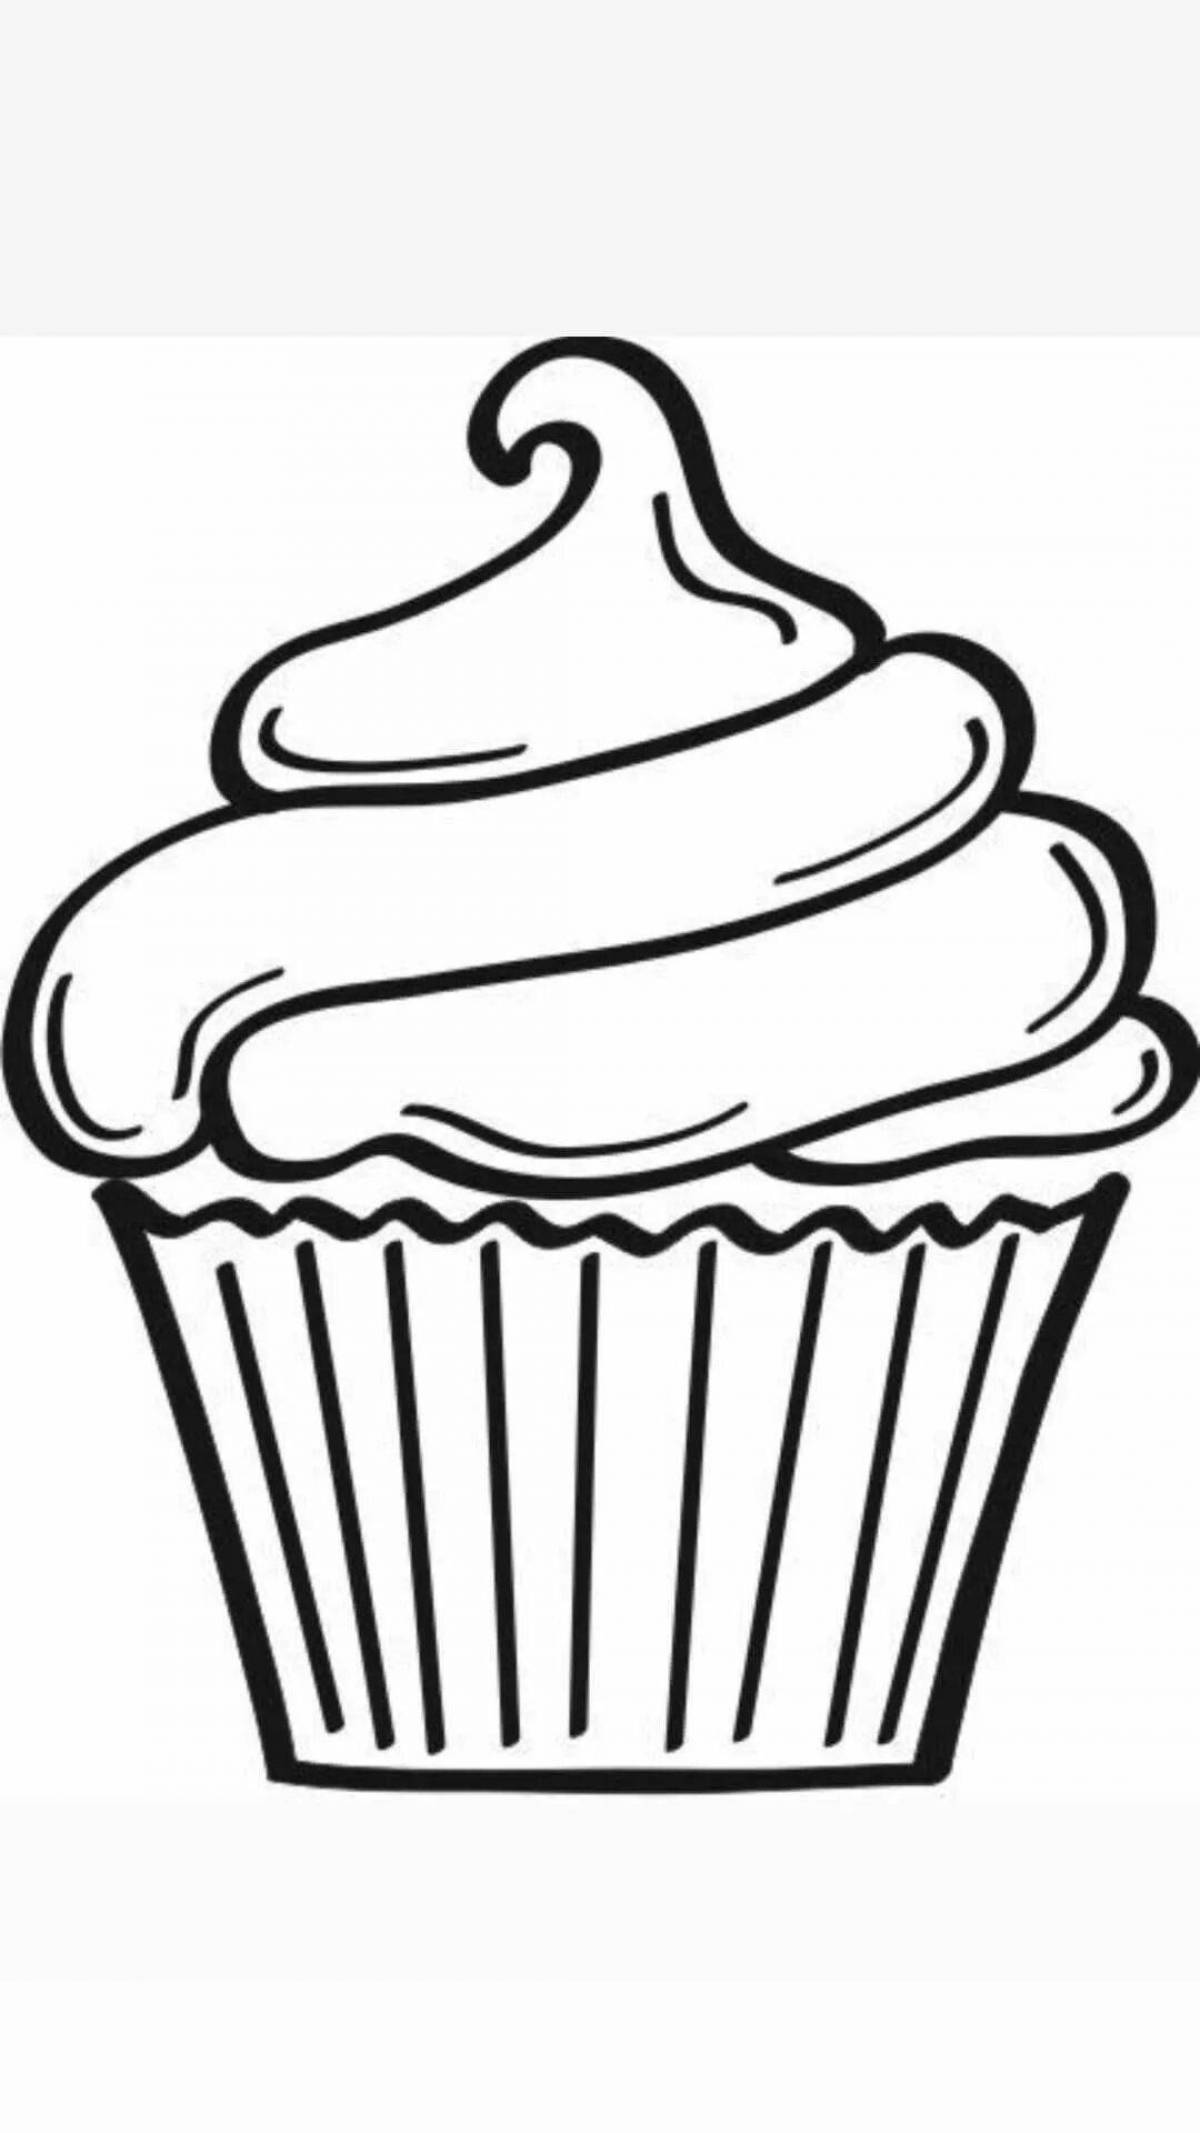 Excited Cupcakes Coloring Page for Kids